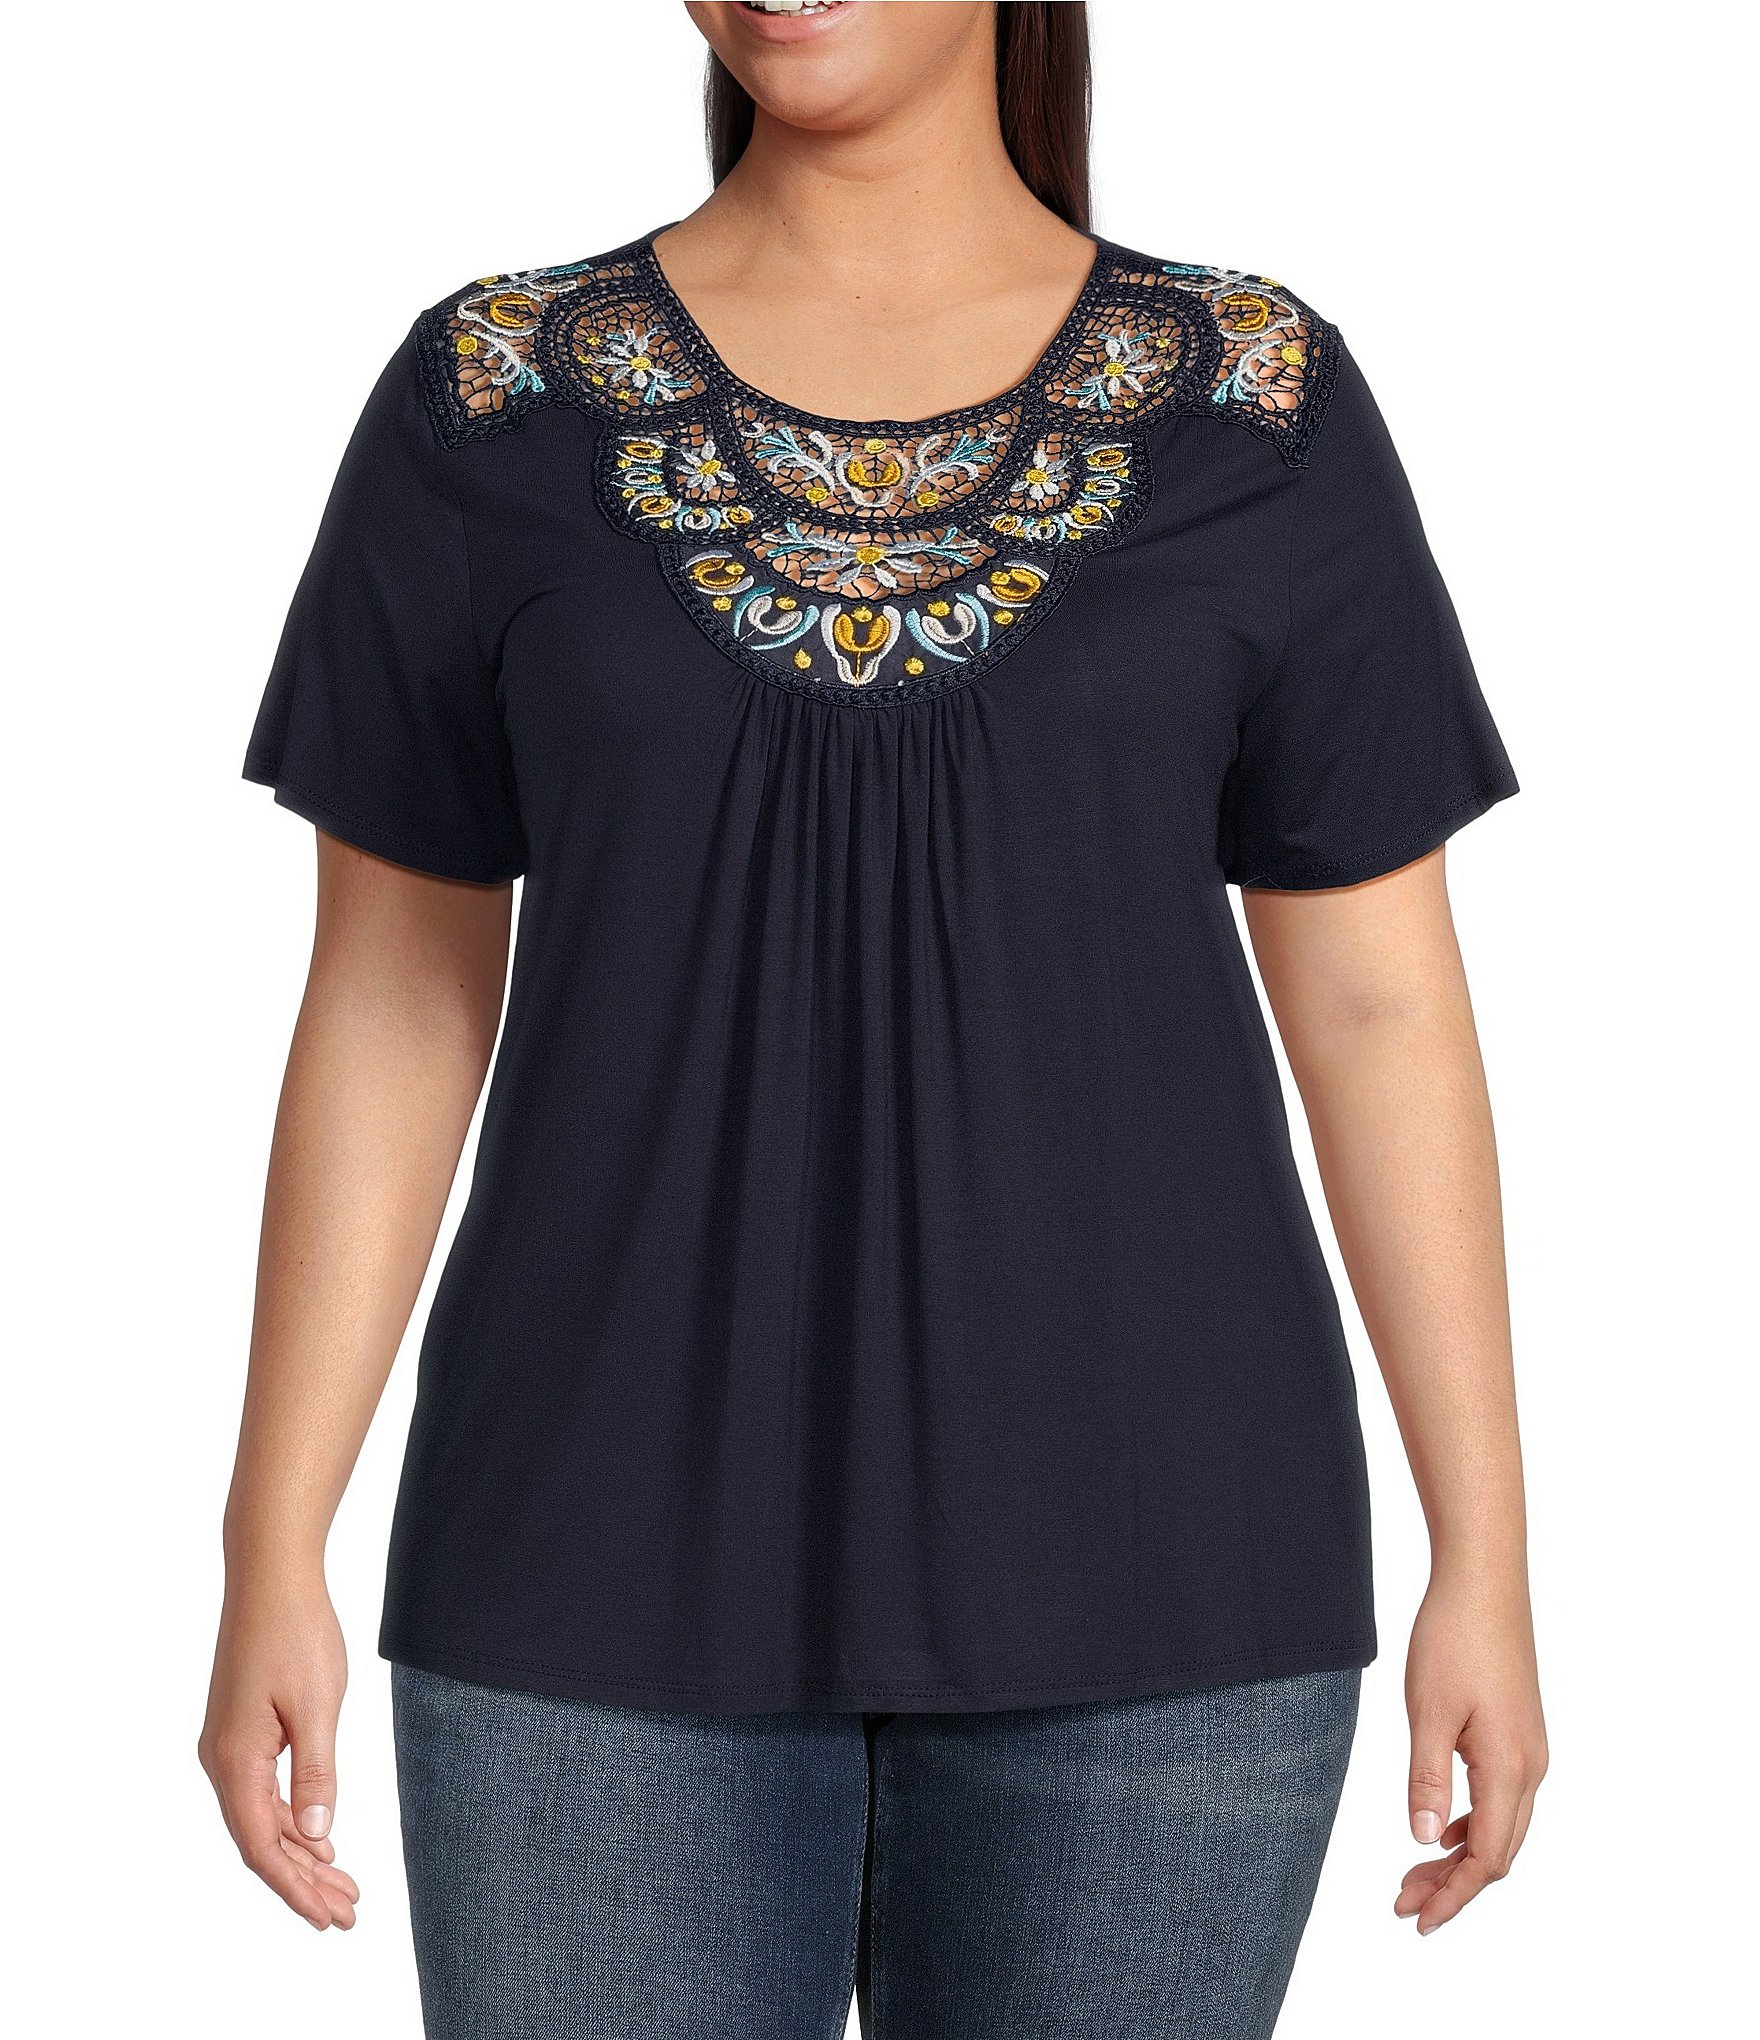 Moa Moa Plus Size Embroidered Applique Scoop Neck Short Sleeve Shirt